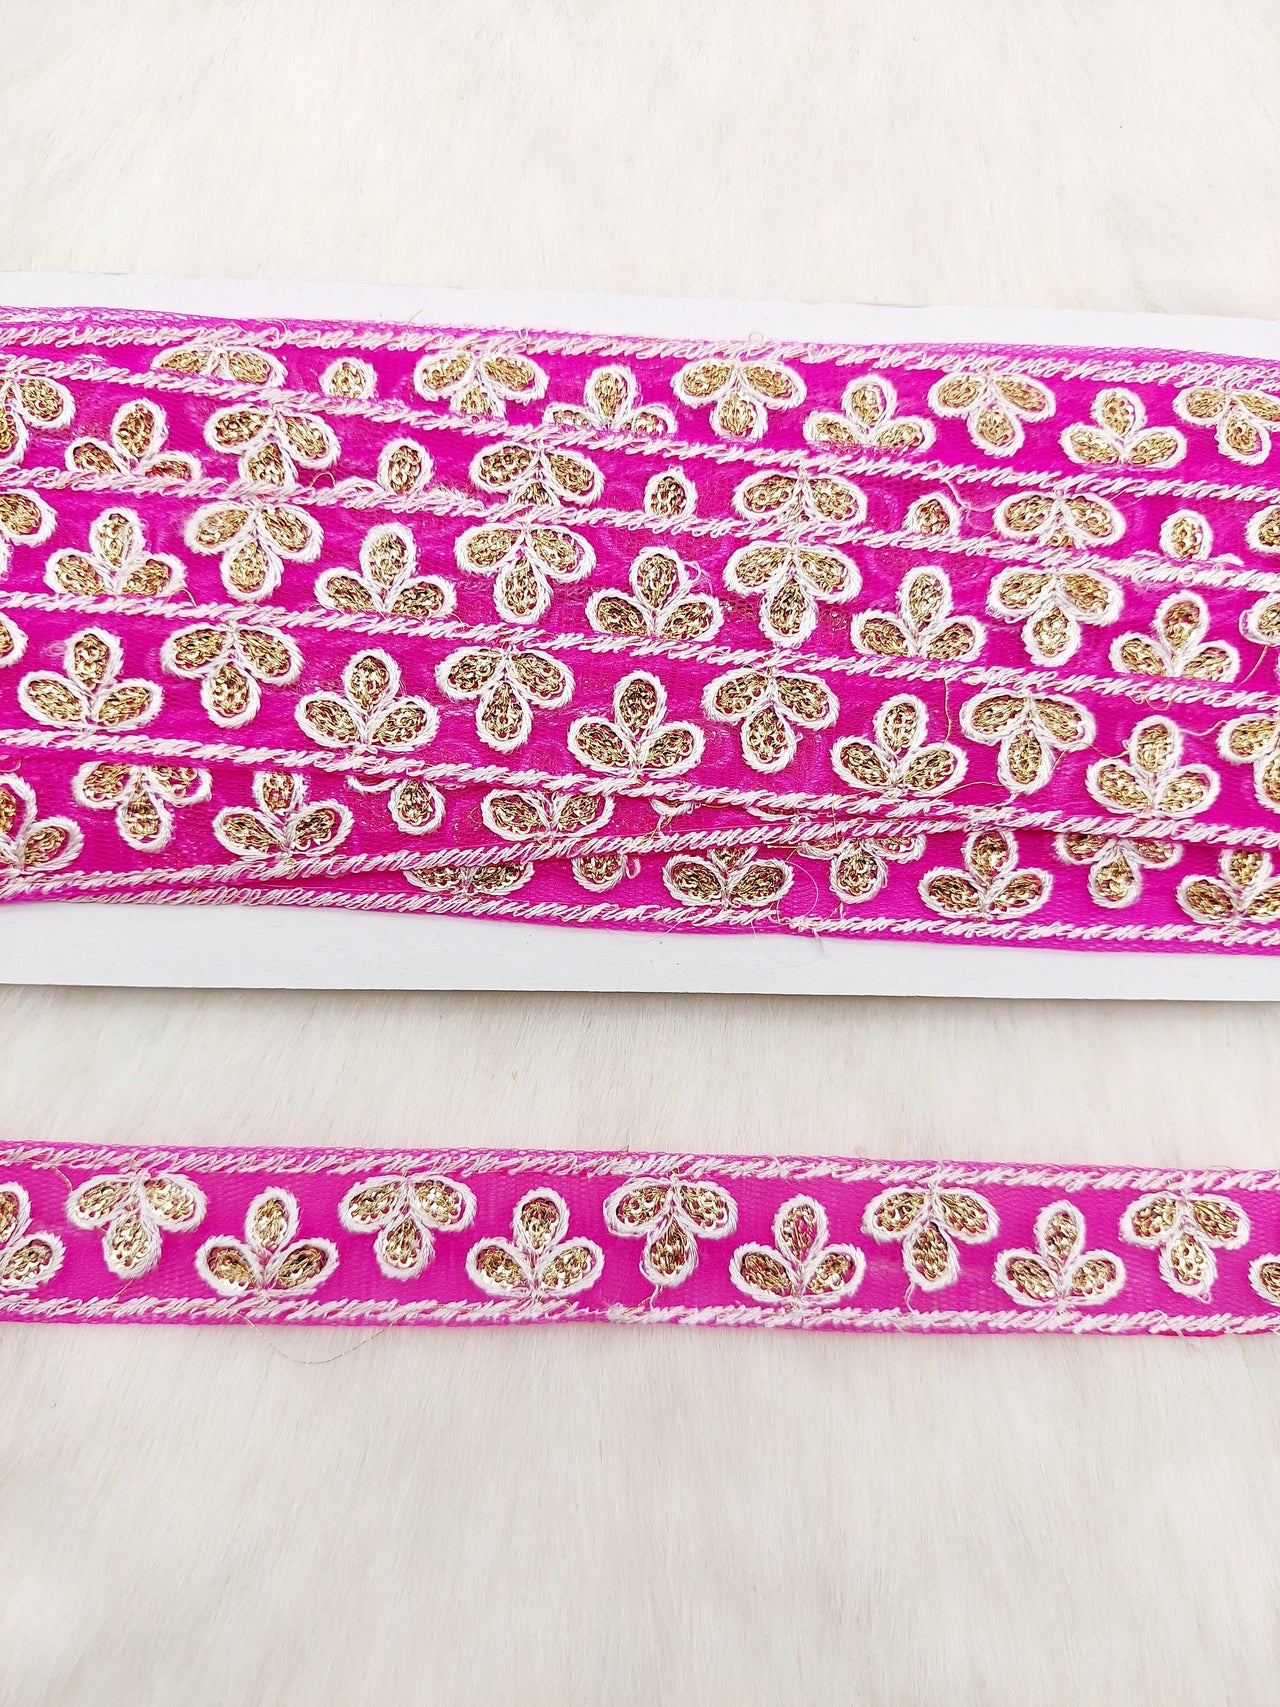 Wholesale Fuchsia Net Lace Floral Embroidery & Glitter Gold Sequins, Indian Wedding Border, Gifting Ribbon Costume Trim Fashion Trimming